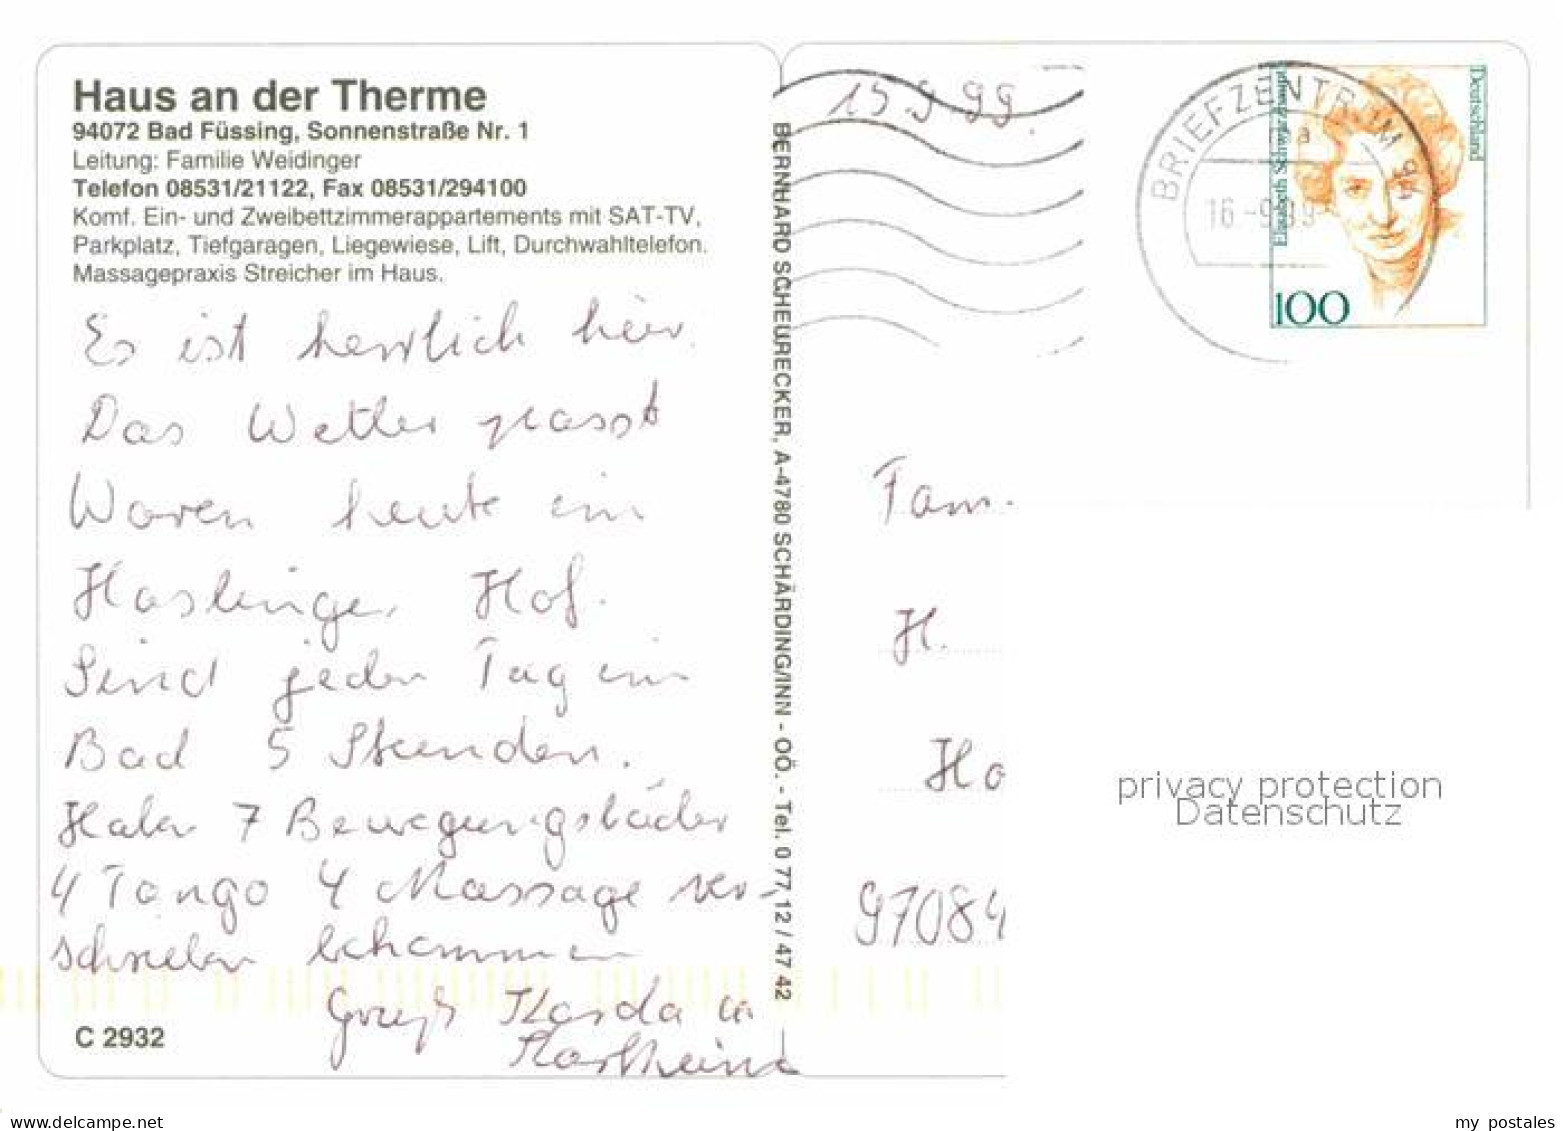 72825330 Bad Fuessing Haus An Der Therme Aigen - Bad Fuessing